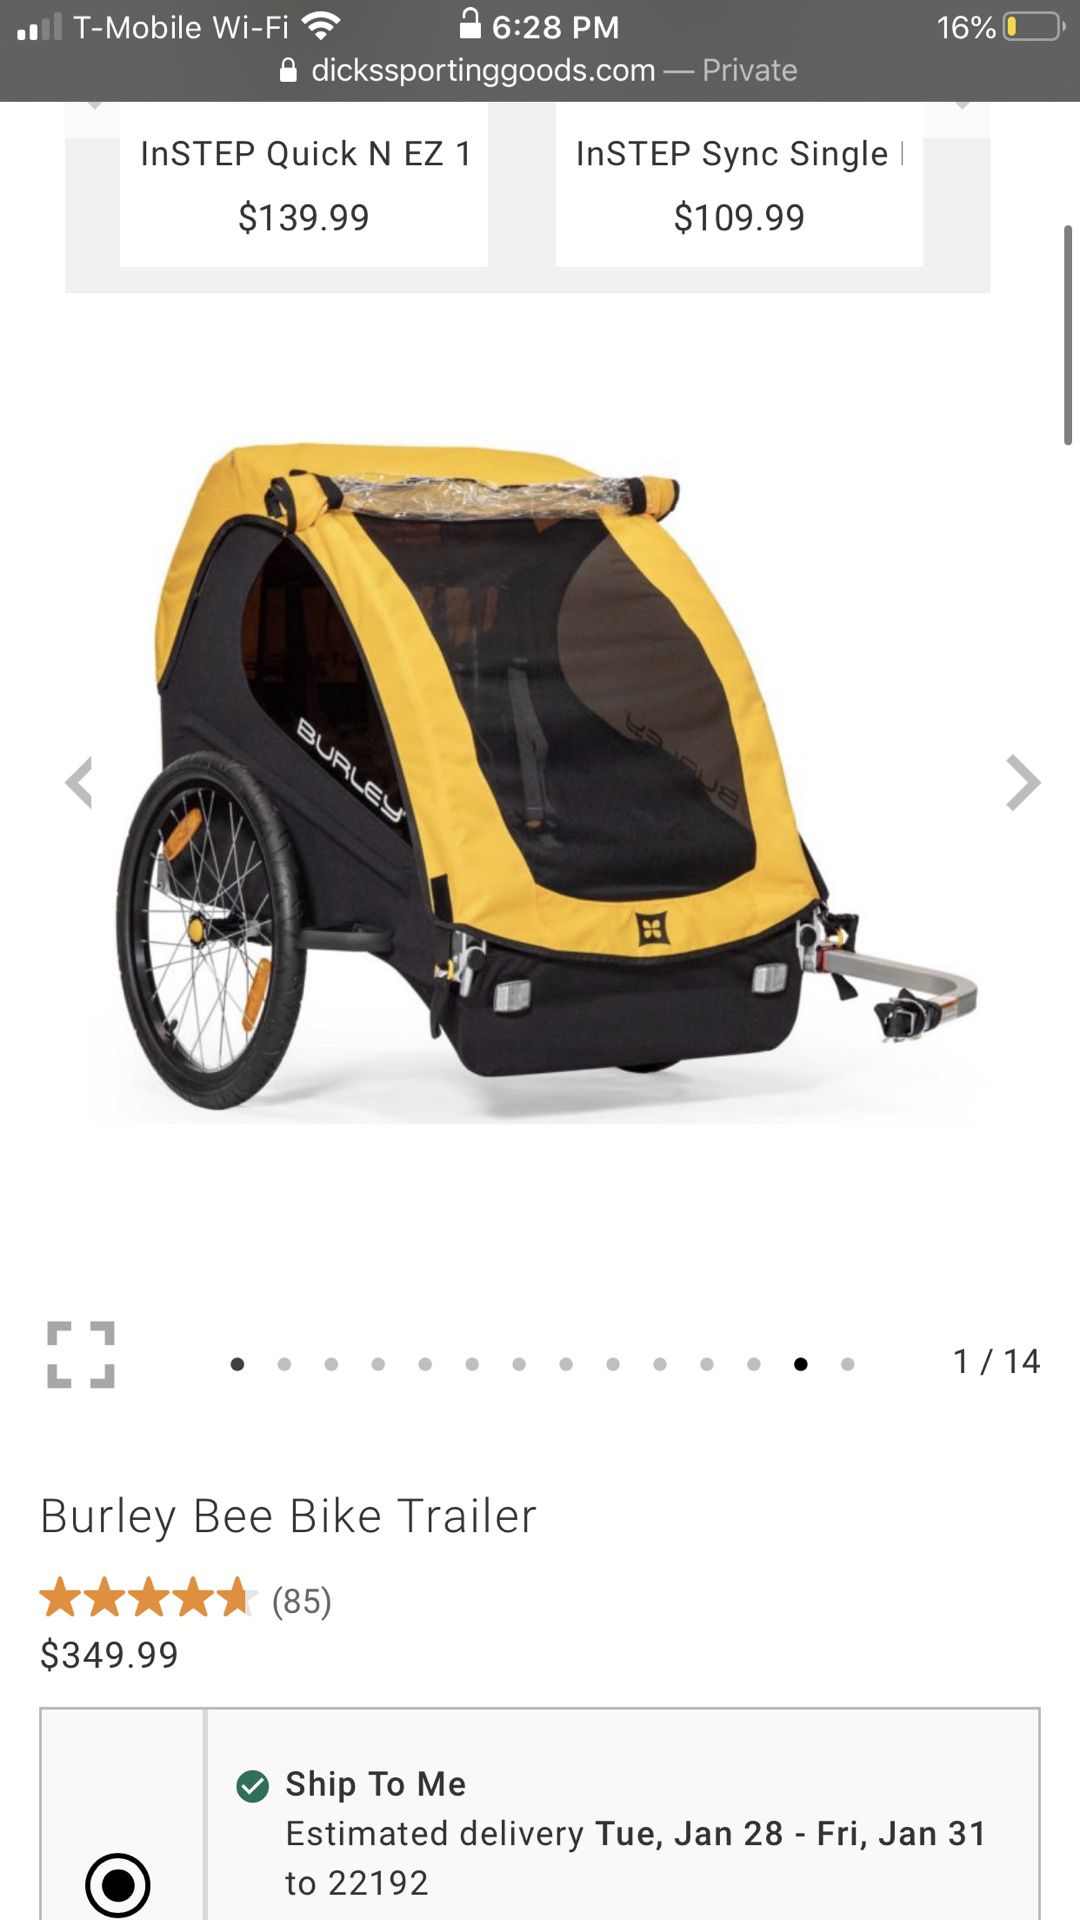 Burley bike trailer for 2 person